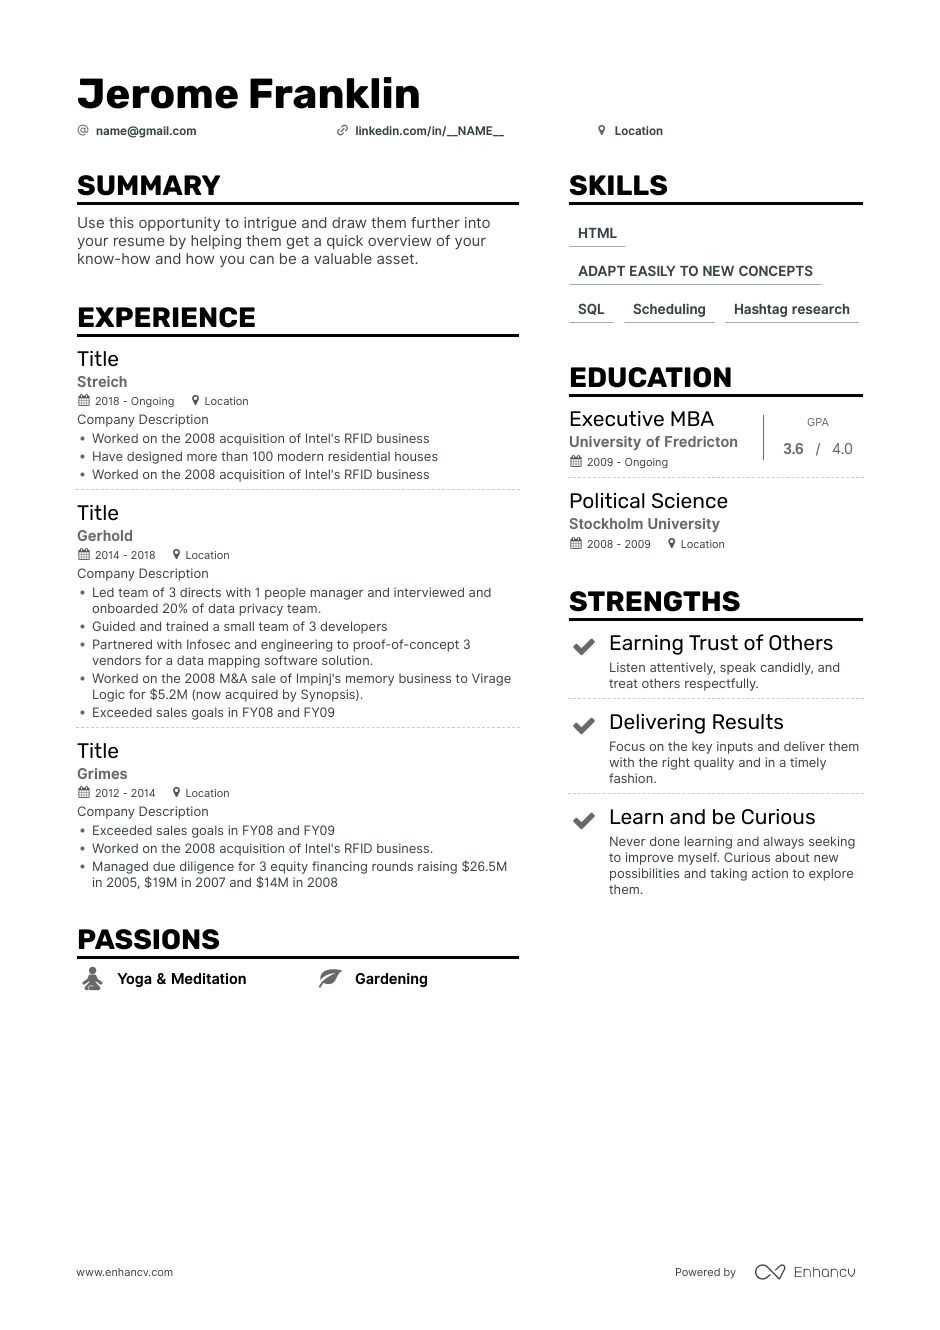 cpa resume example